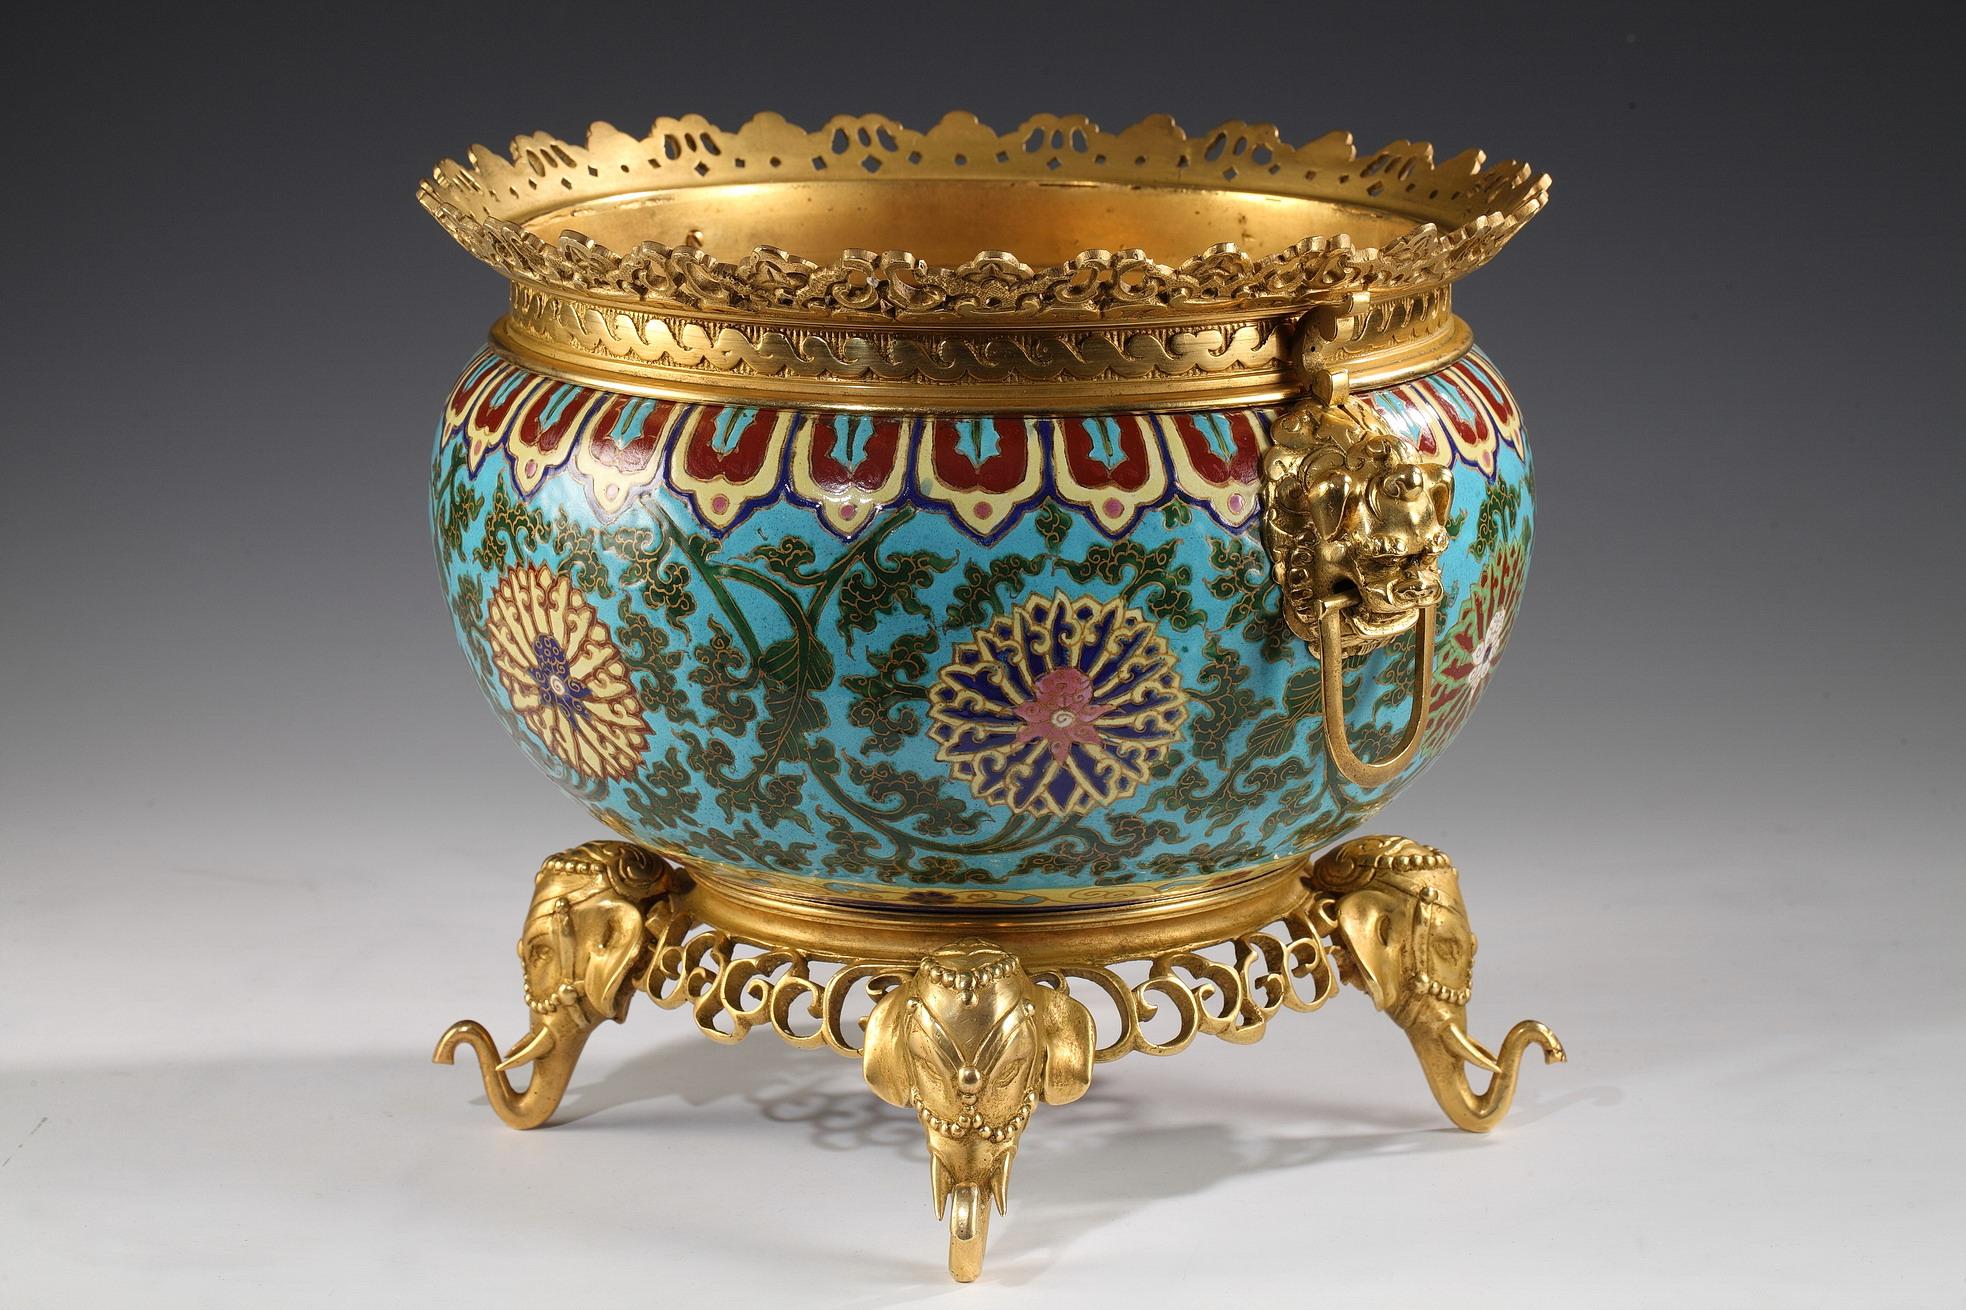 This circular planter in enamel ceramic, by L'Escalier de crystal, is embellished with a floral and vegetal polychrome décor upon a celestial blue background. Beautiful chiselled and gilded bronze openwork mounting of Fô dogs forming the handles.